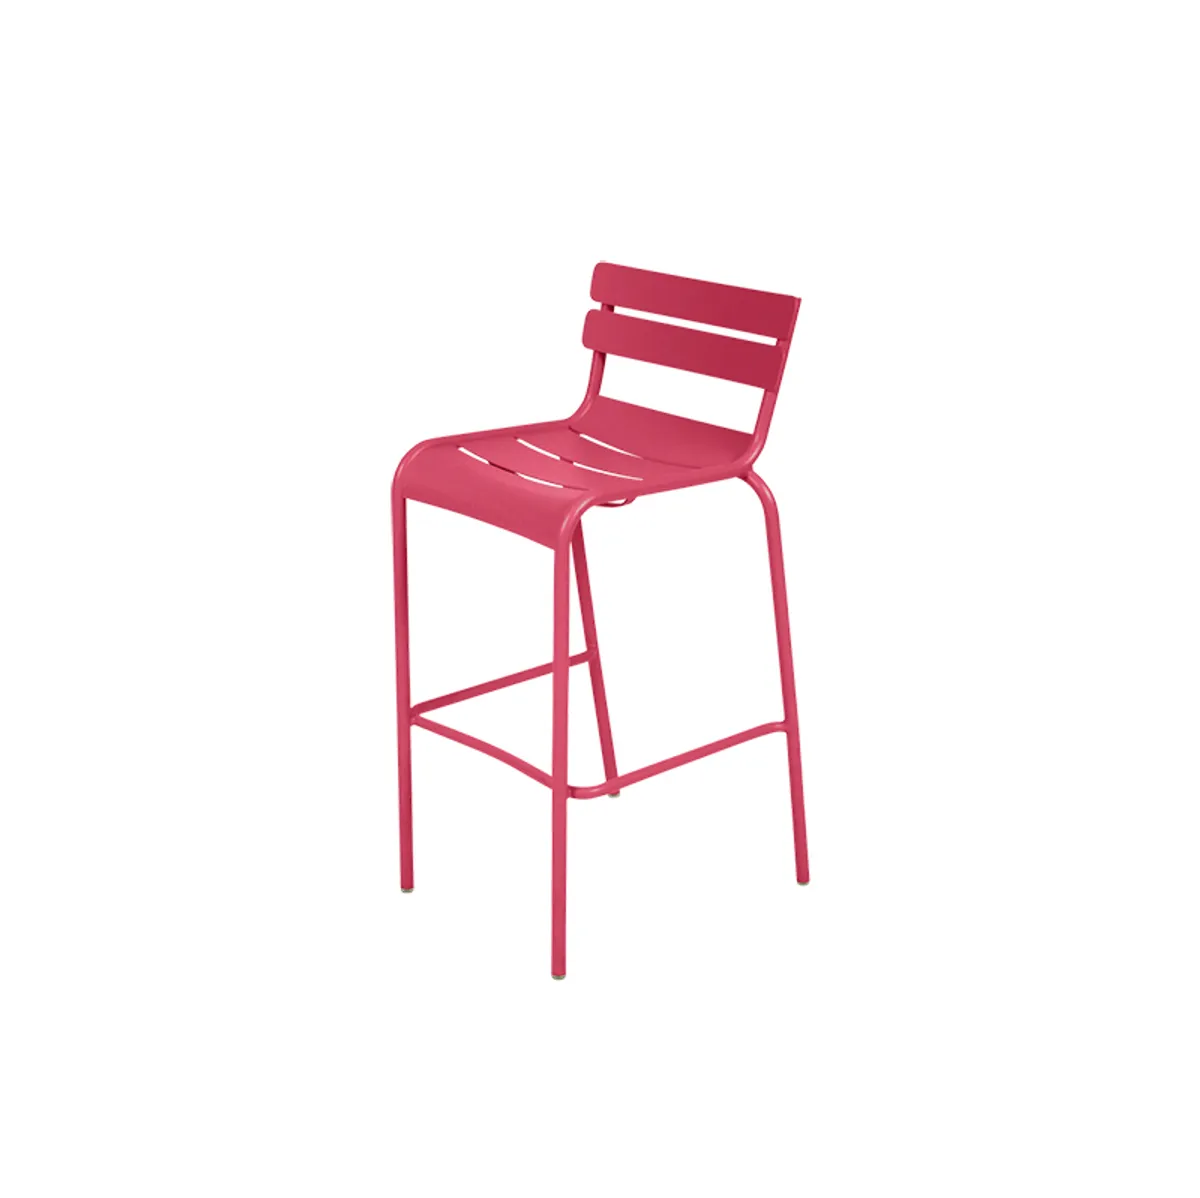 Luxembourg High Stool Furniture For Outdoor Cafe And Bars Pink